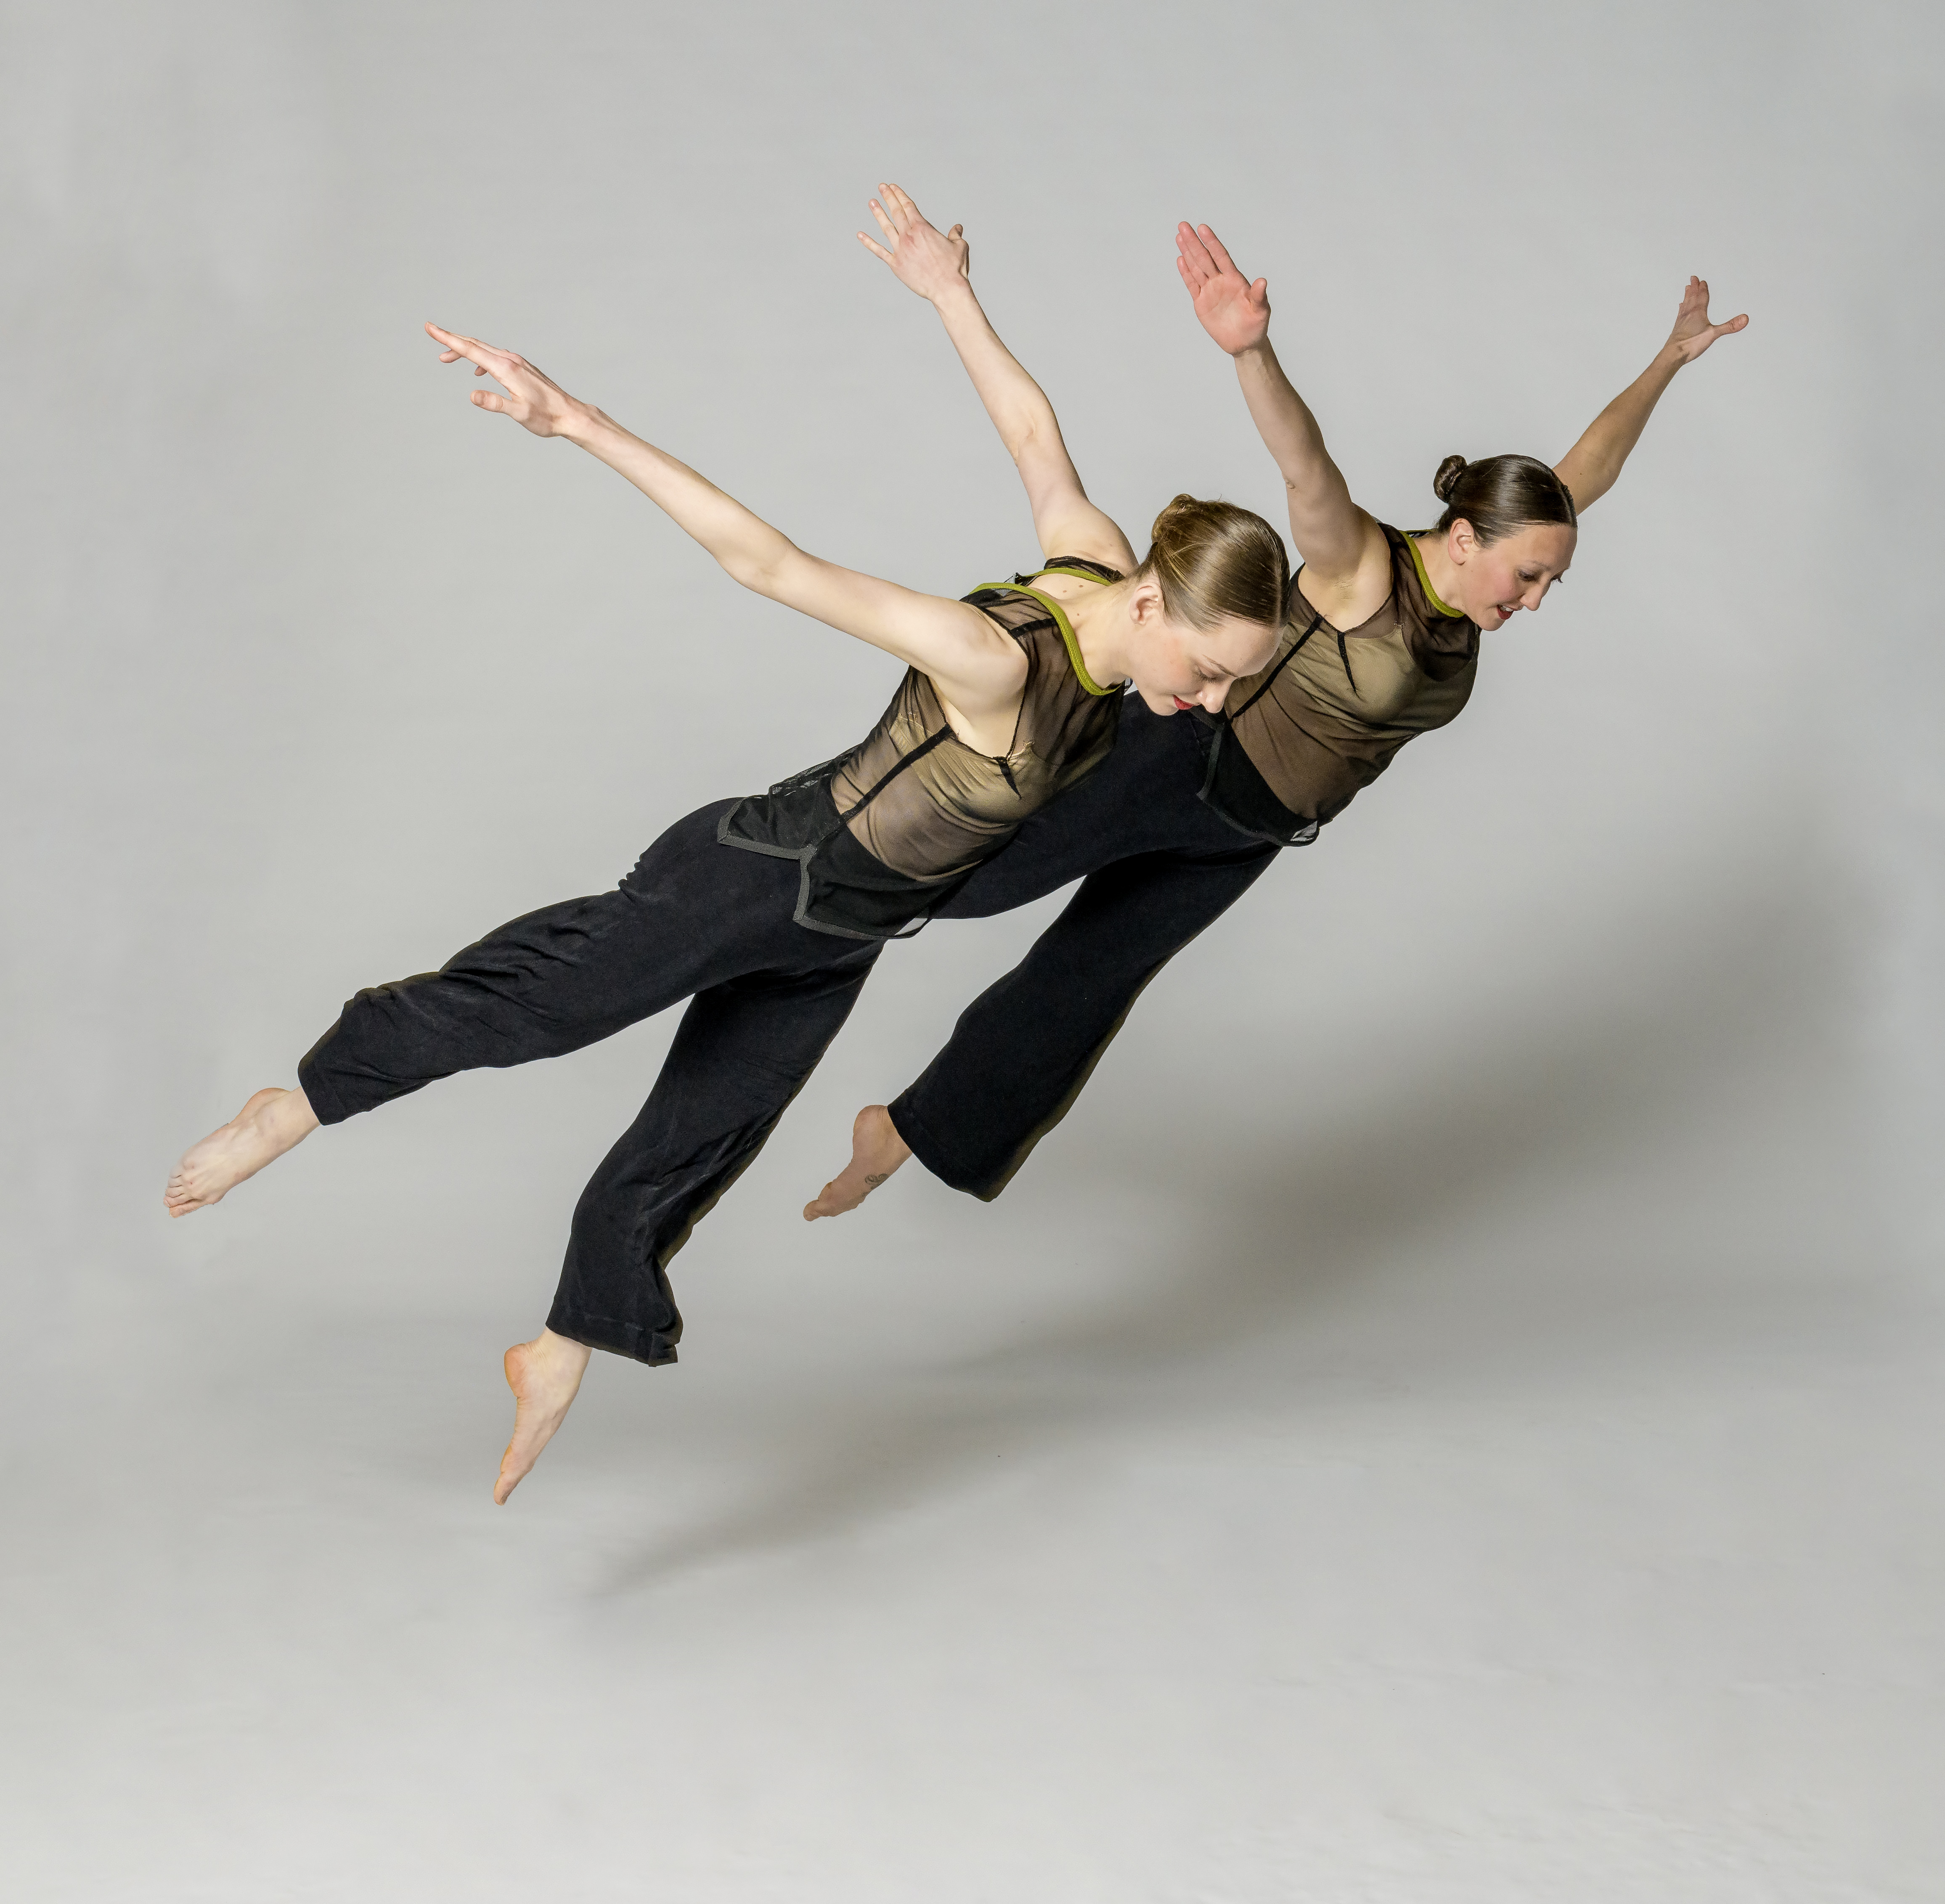 two dancers with arms raised overhead leap in the air while tilted forward